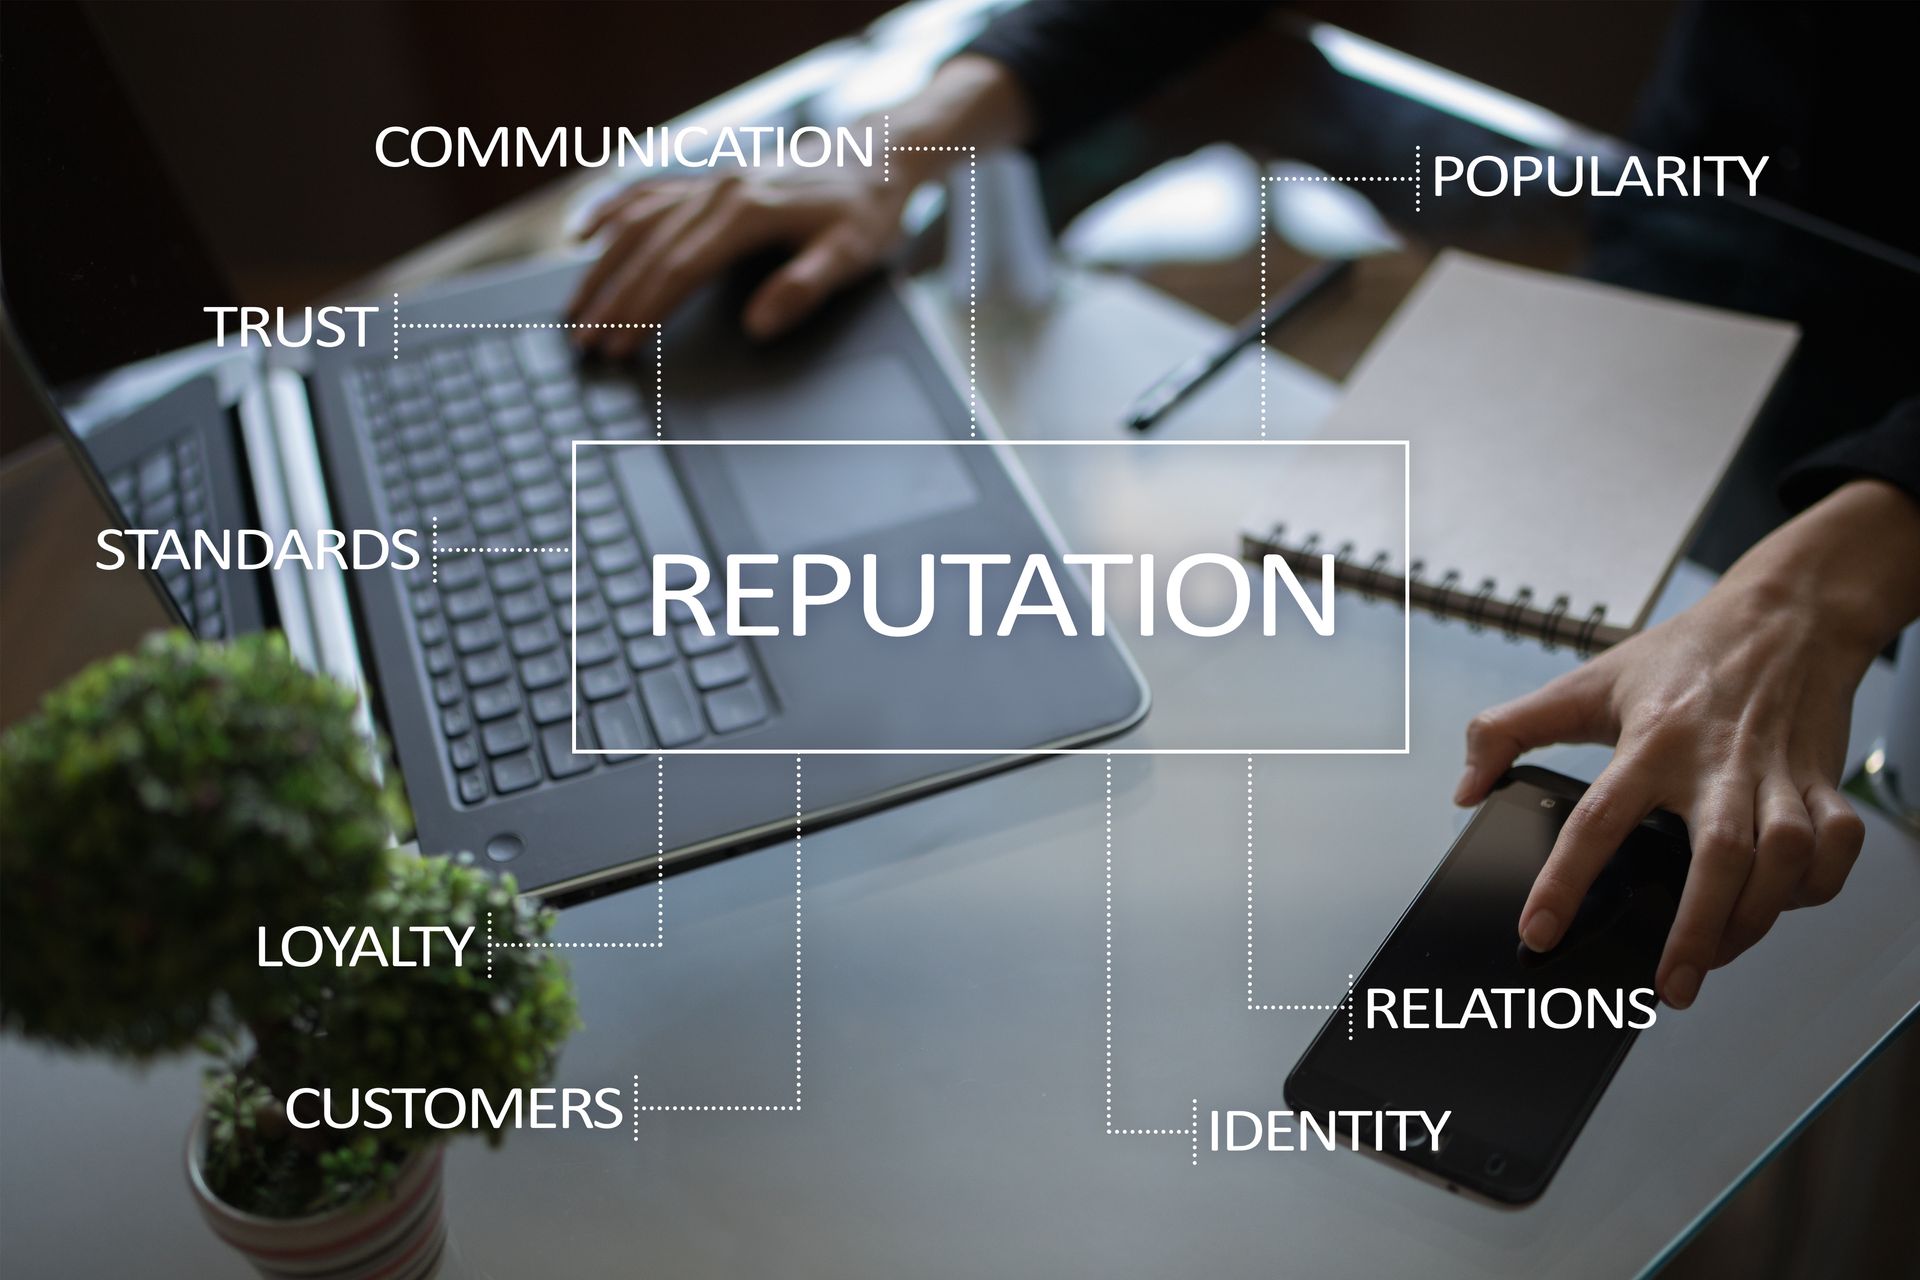 Traits of an online reputation management company